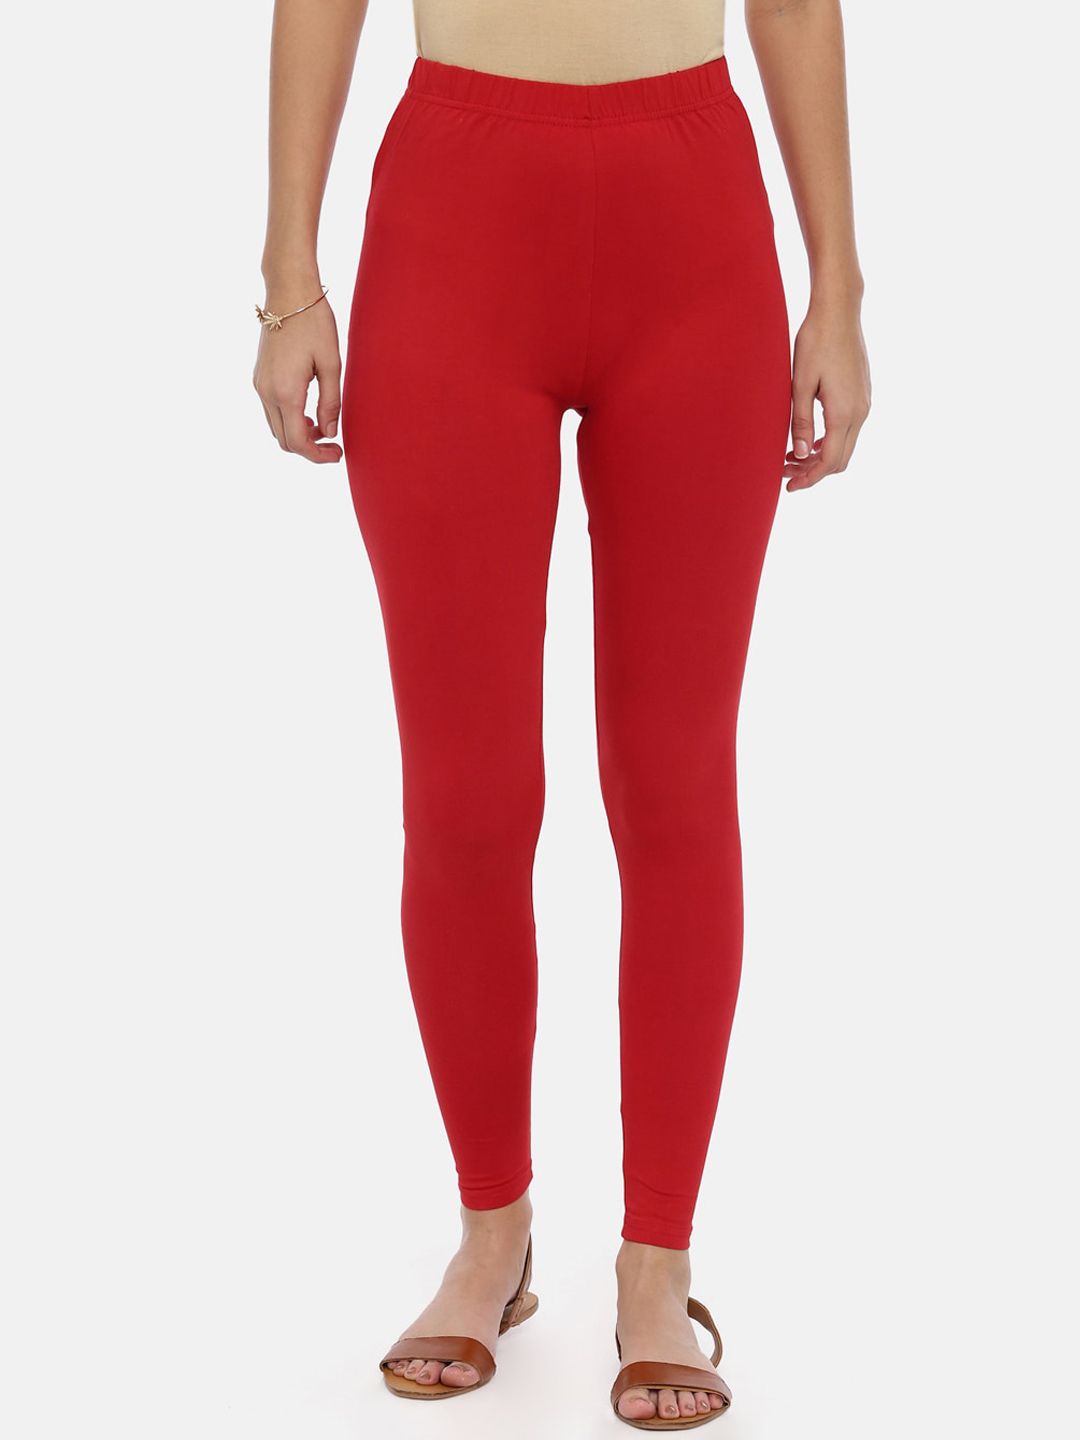 Souchii Women Red Solid Slim-Fit Ankle-Length Leggings Price in India